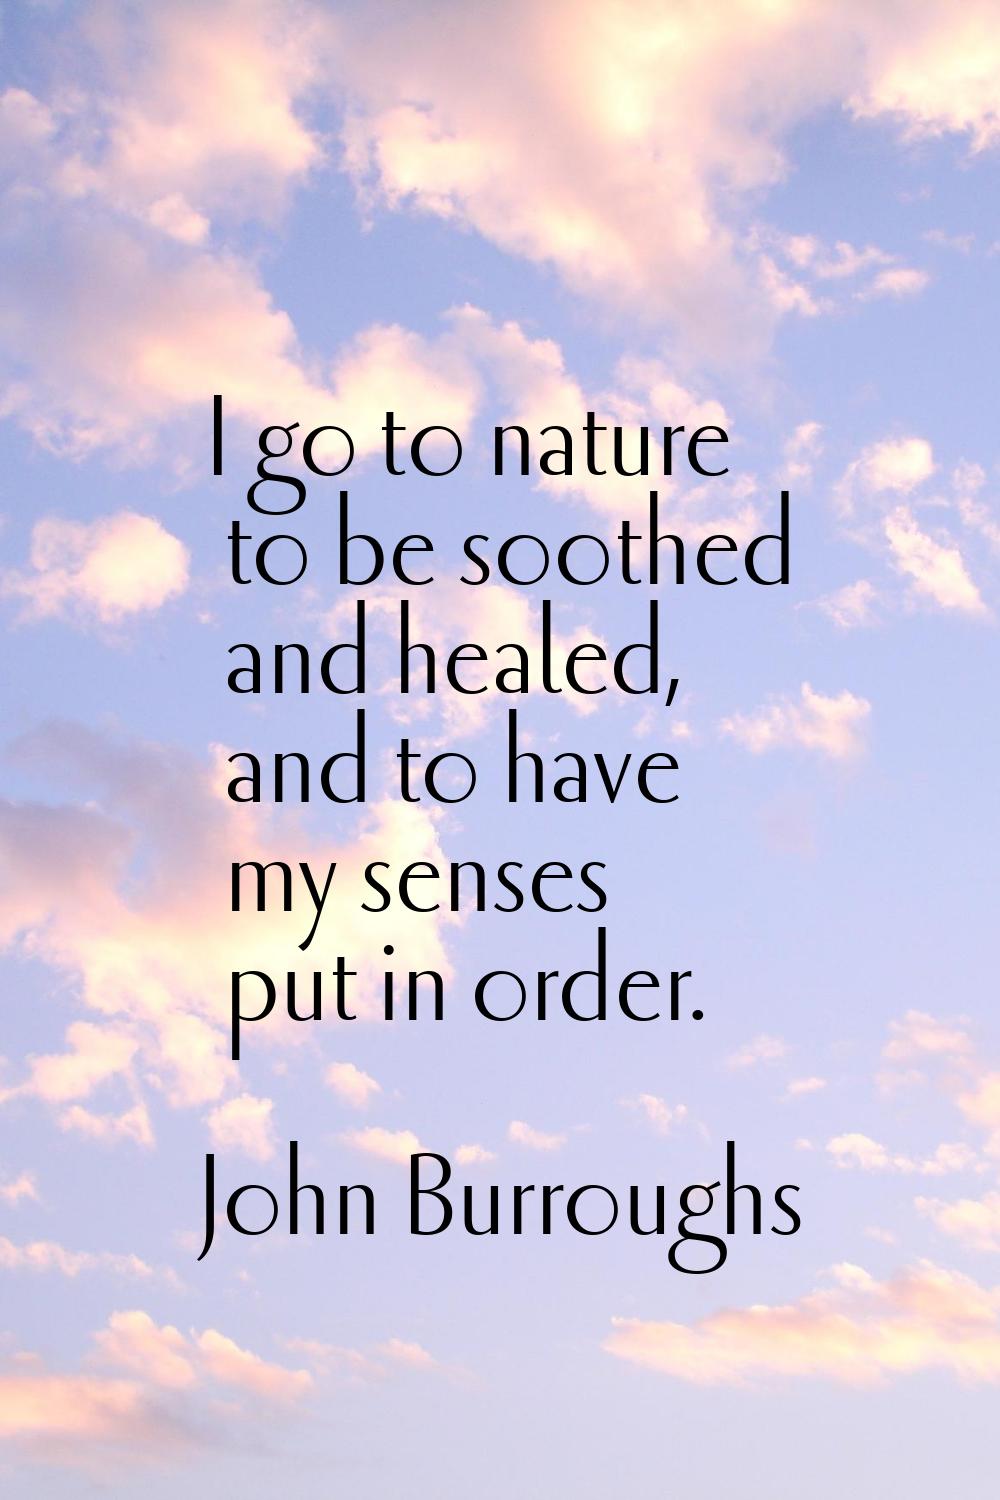 I go to nature to be soothed and healed, and to have my senses put in order.